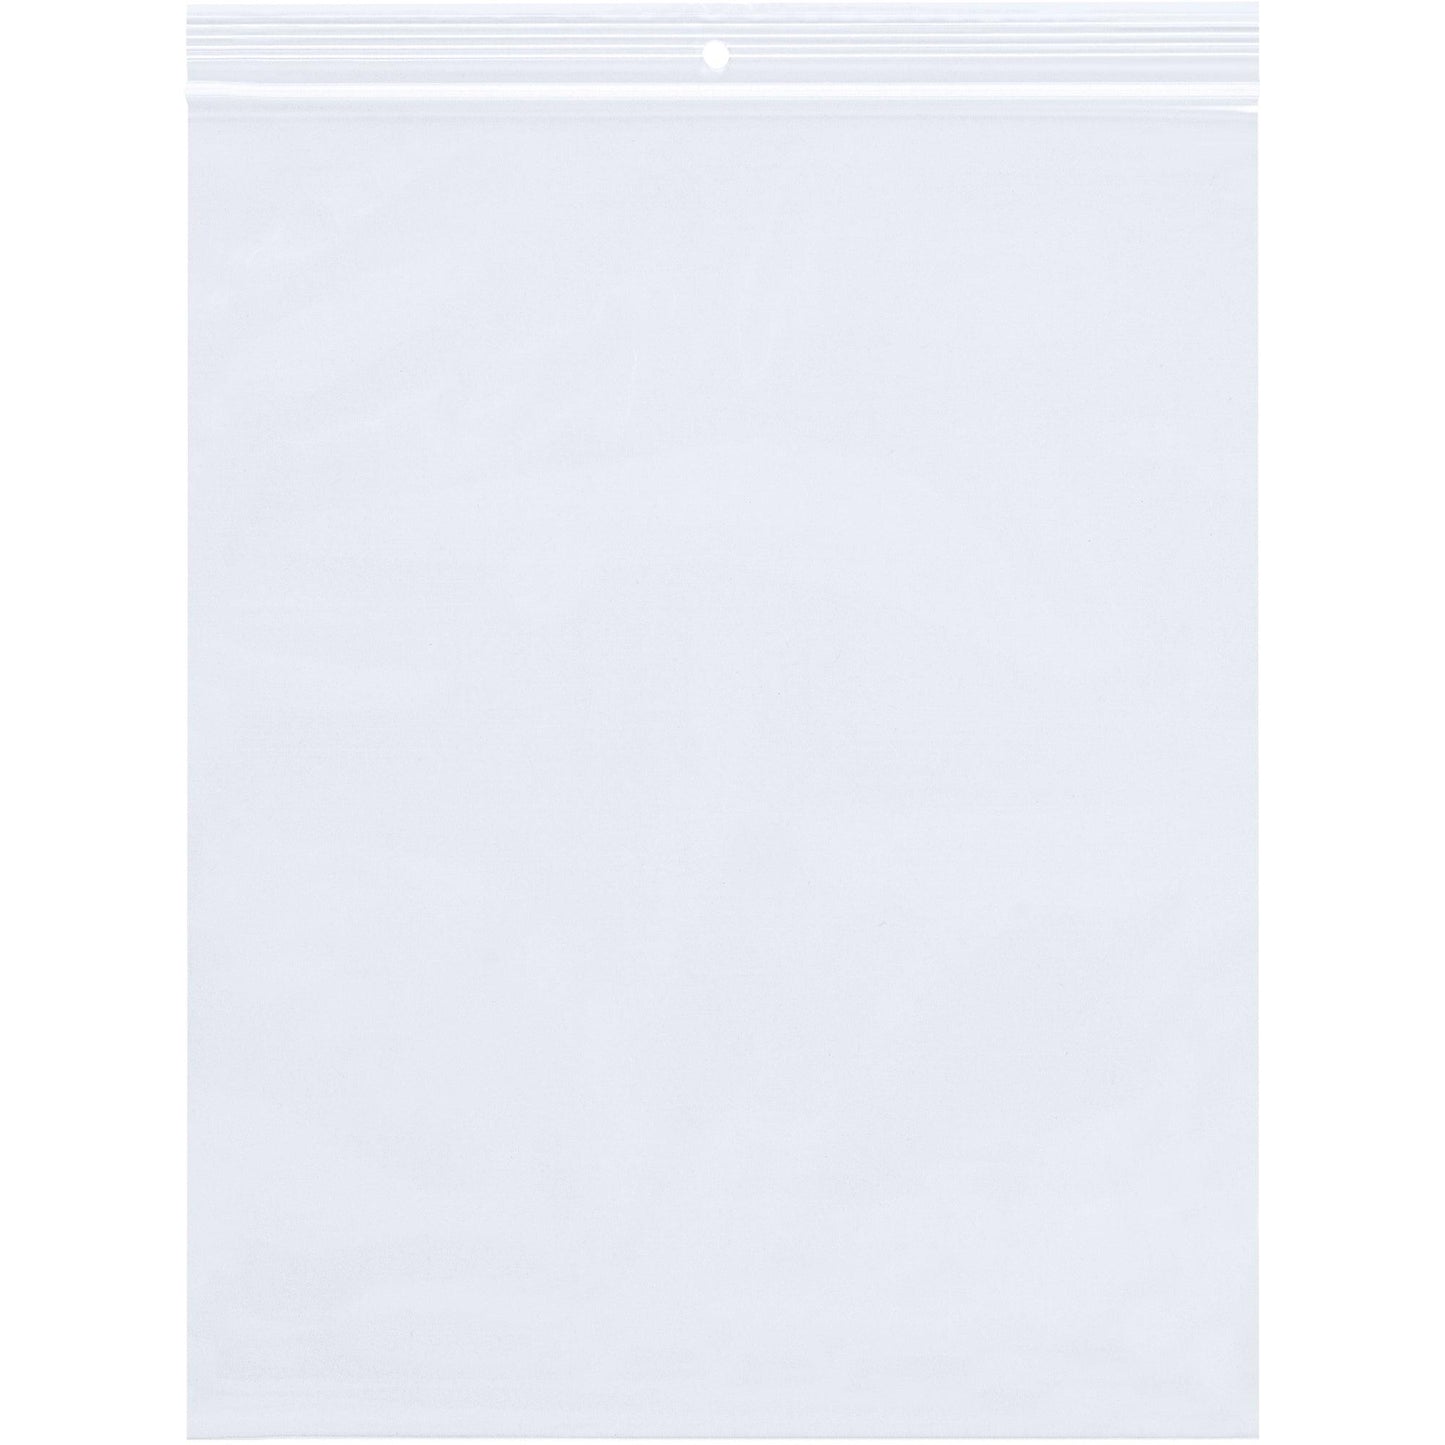 12 x 15" - 4 Mil Reclosable Poly Bags w/ Hang Hole - PB7025